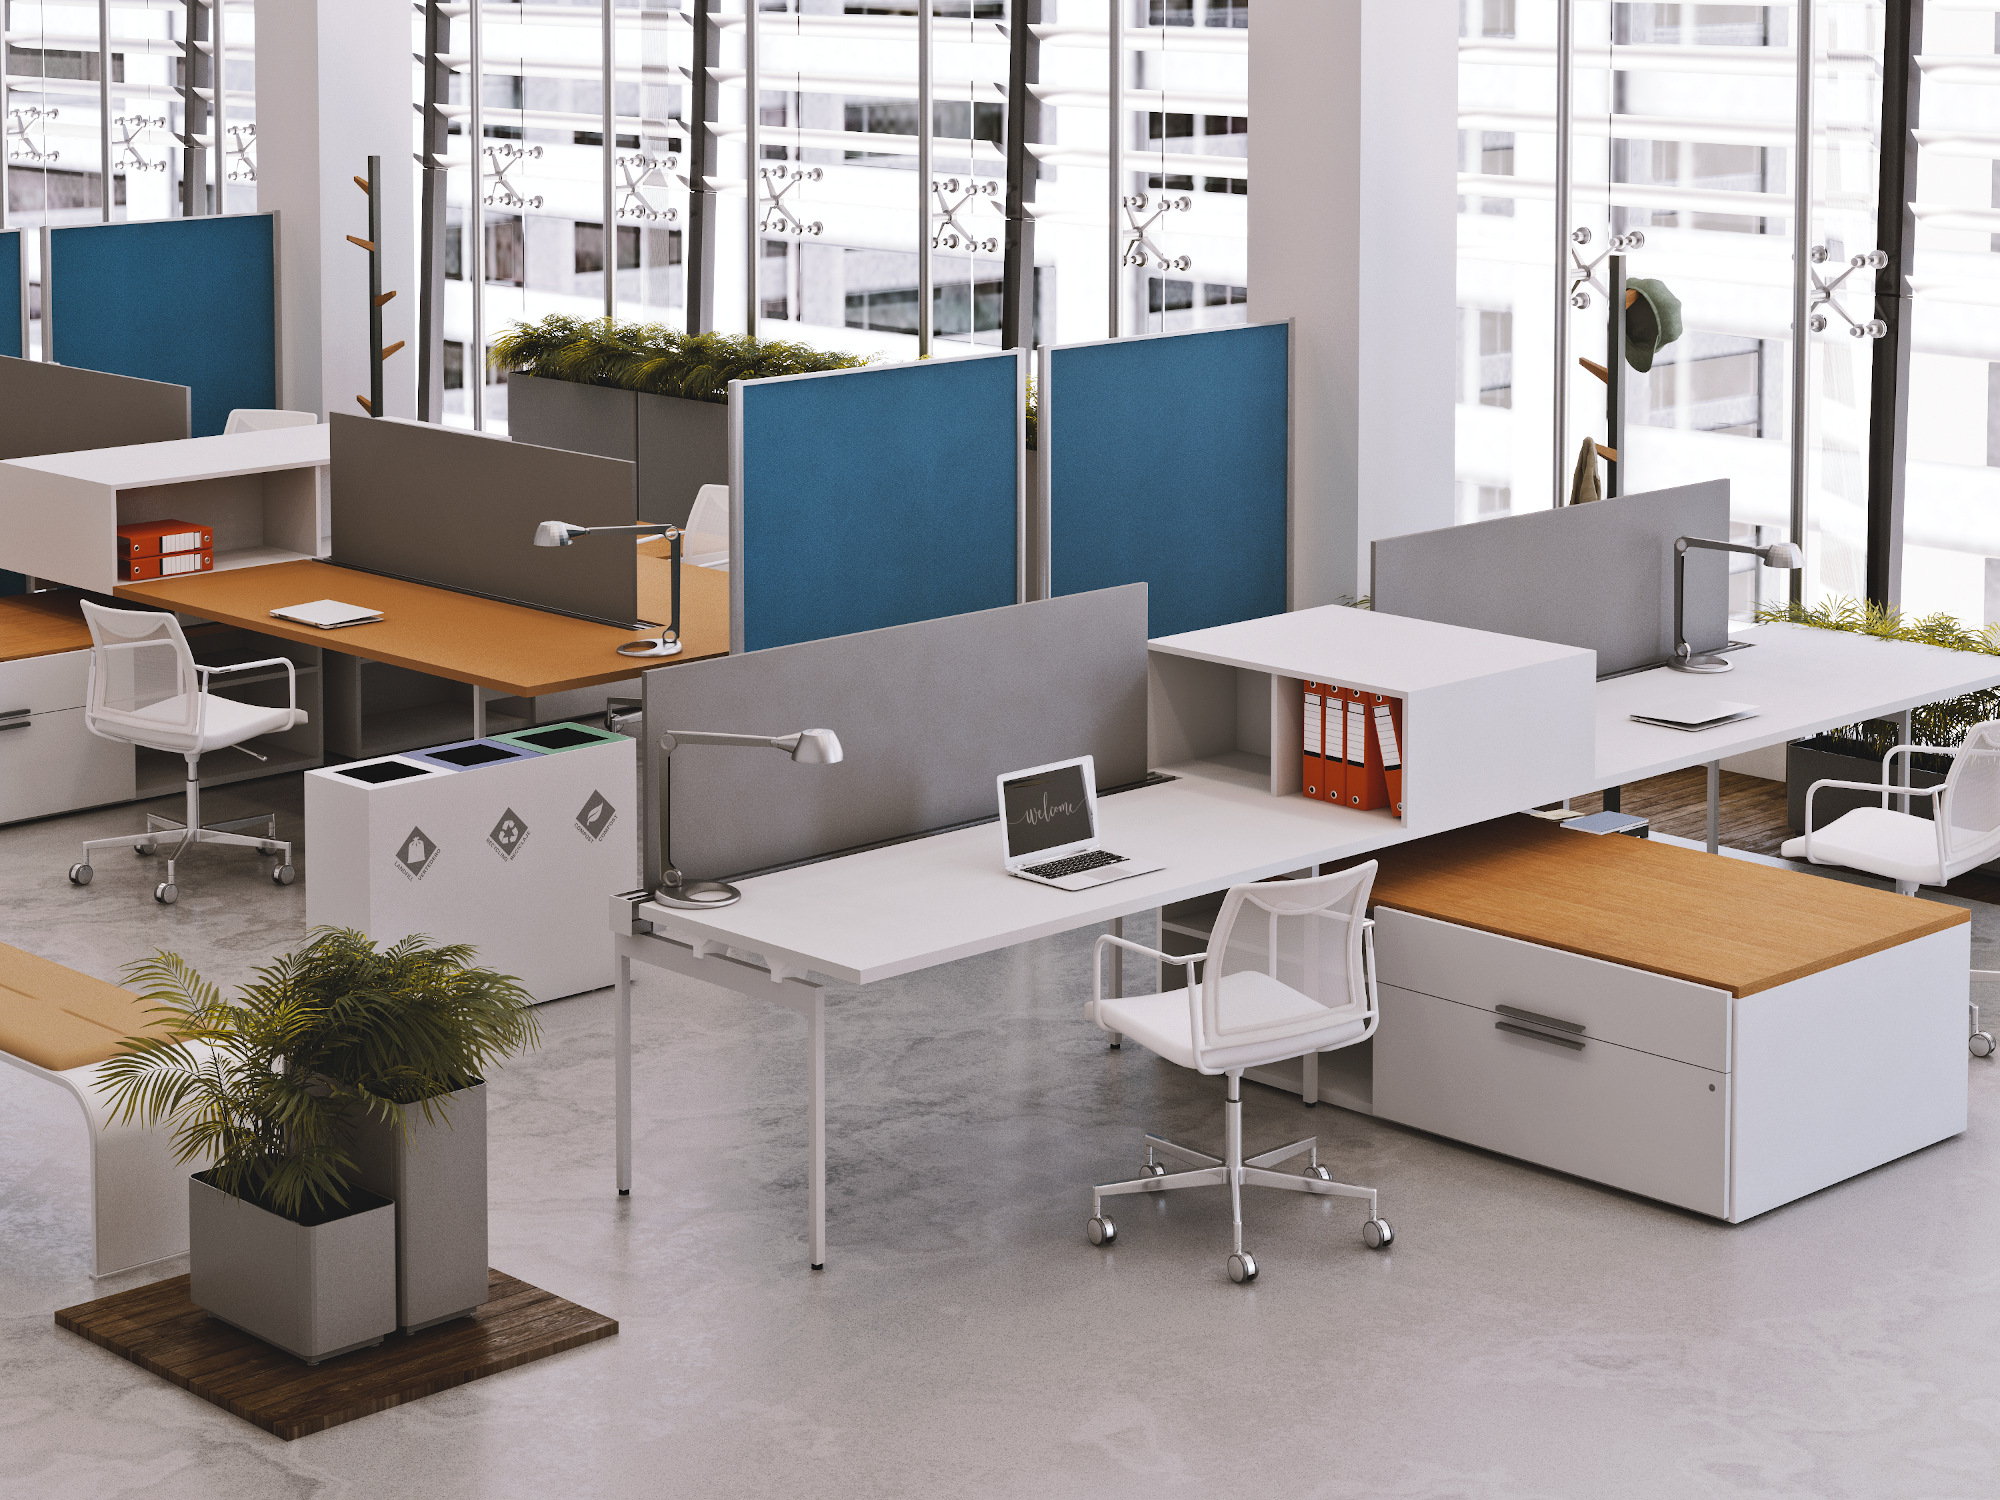 Lifestyle renderings for office furniture manufacturers